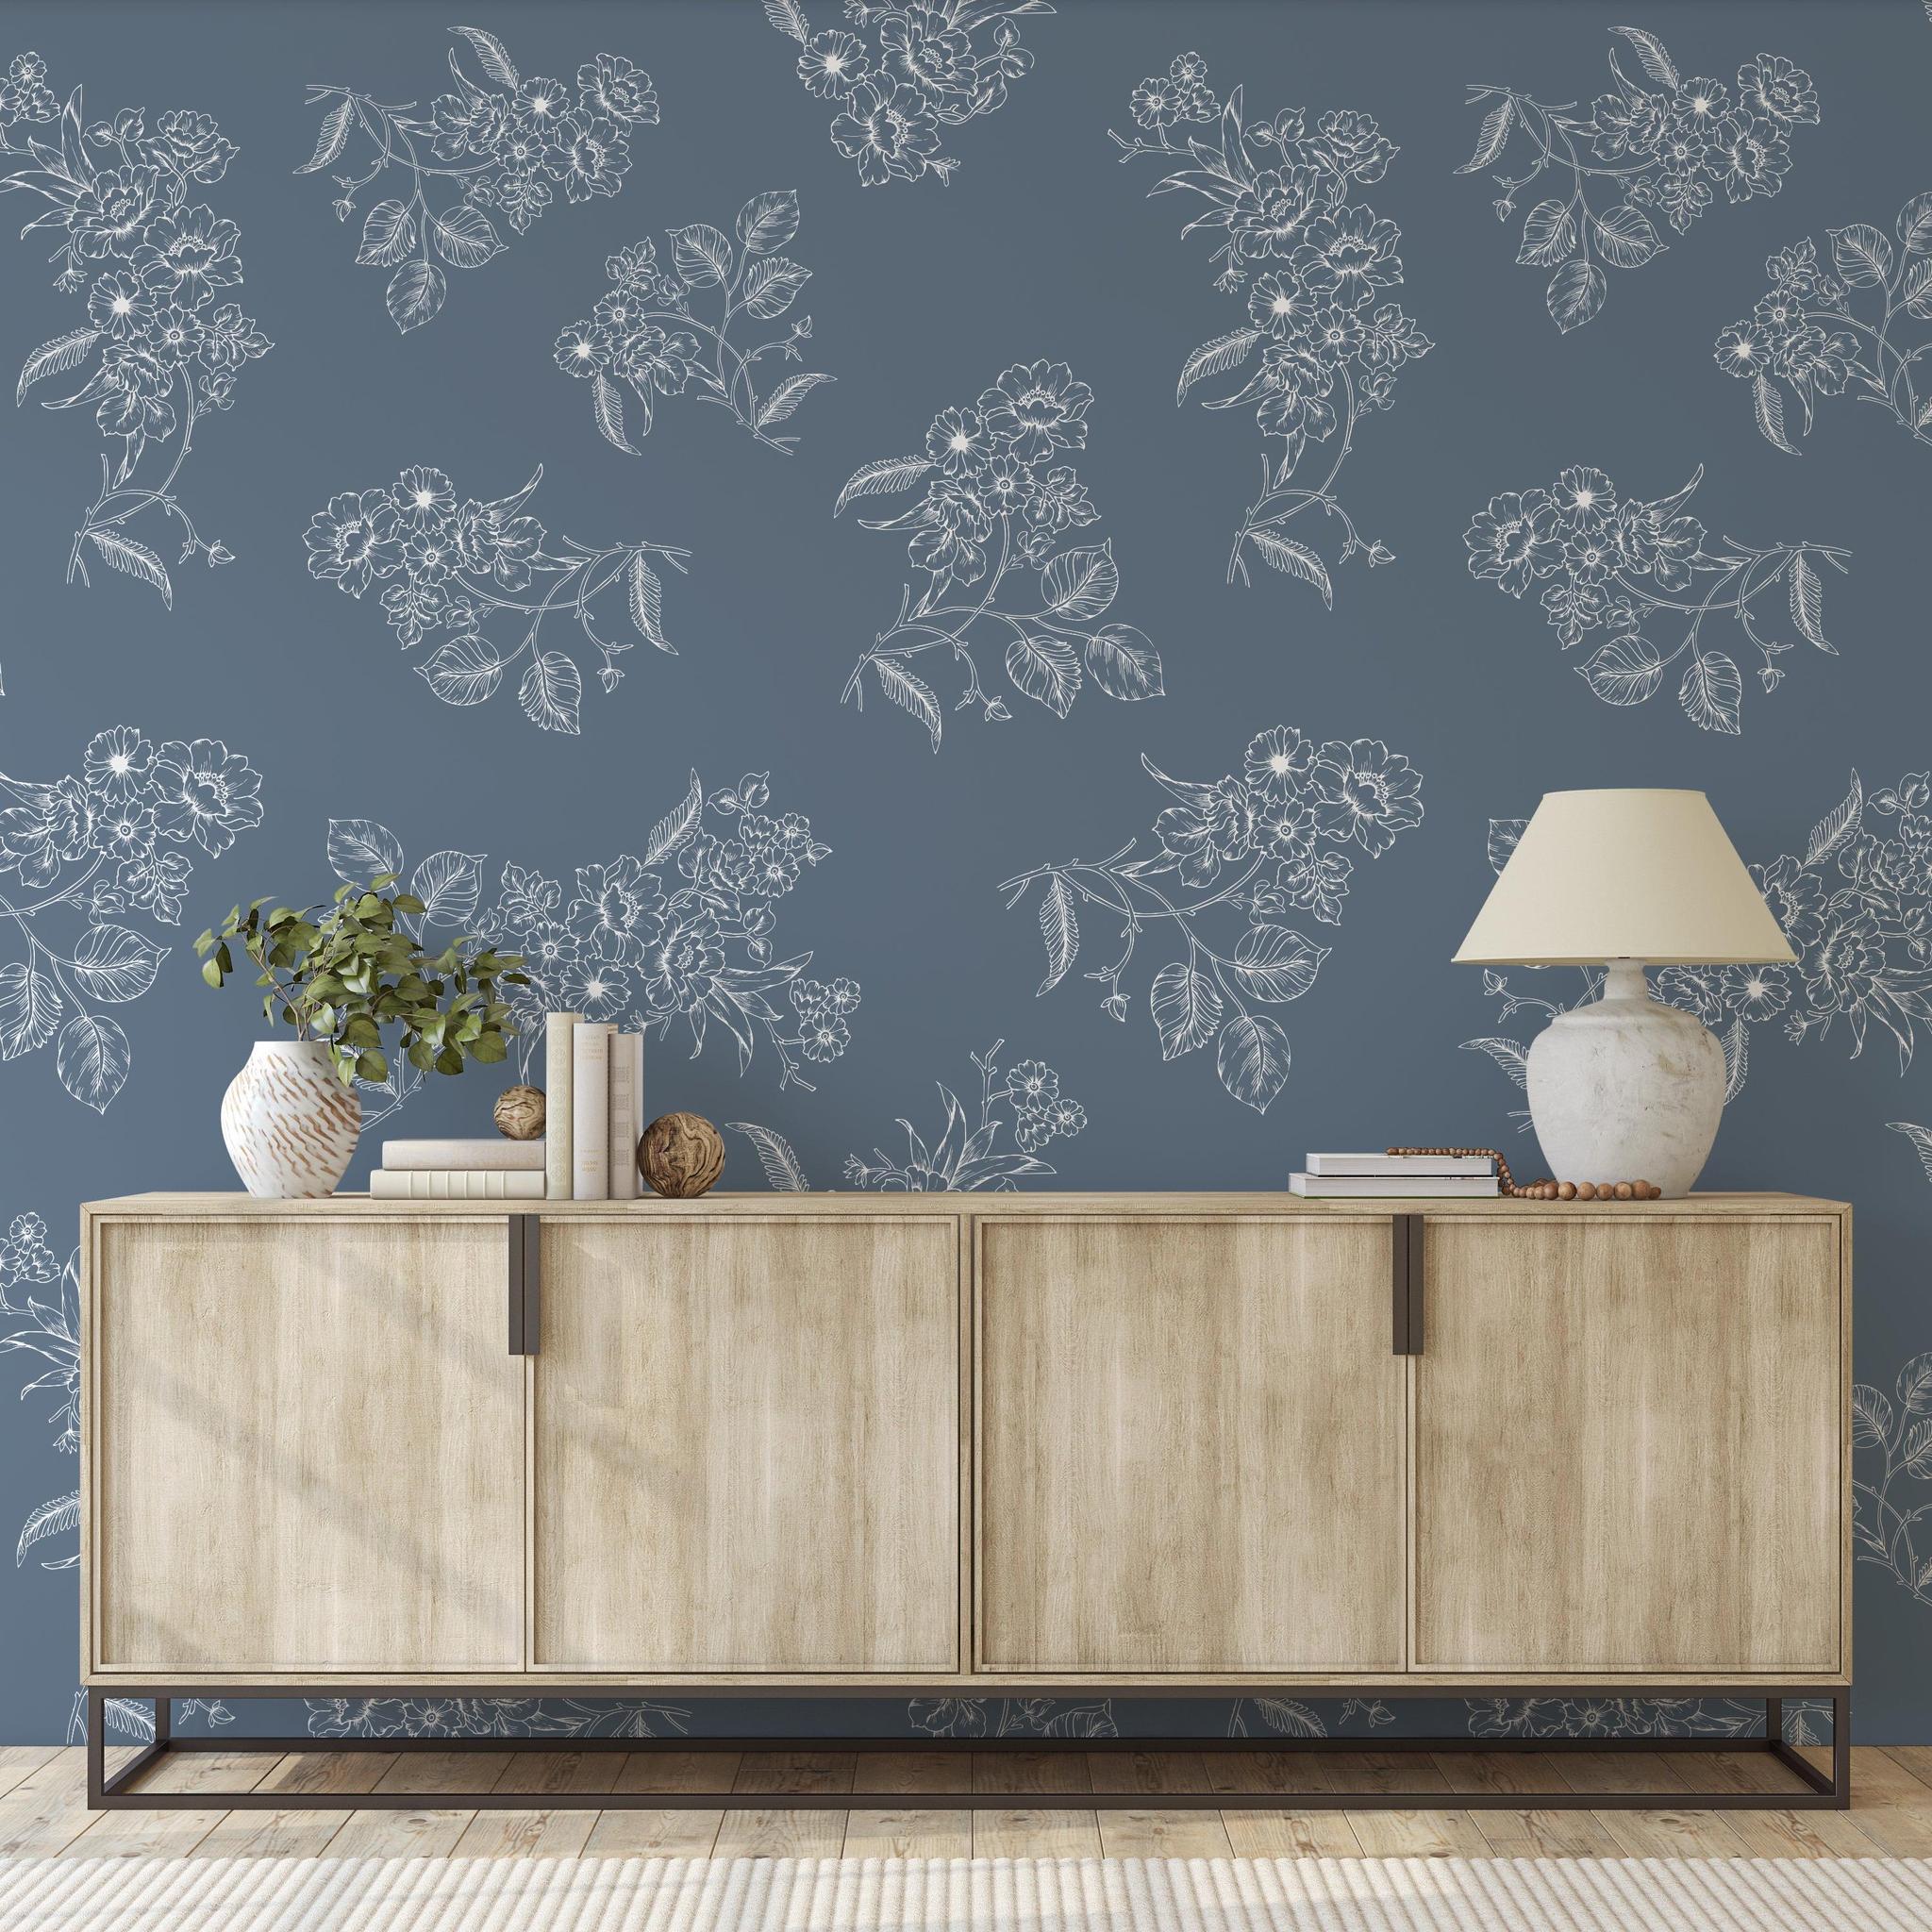 Elegant Tiffanys Wallpaper by Wall Blush in a modern living room, highlighting the floral design.
